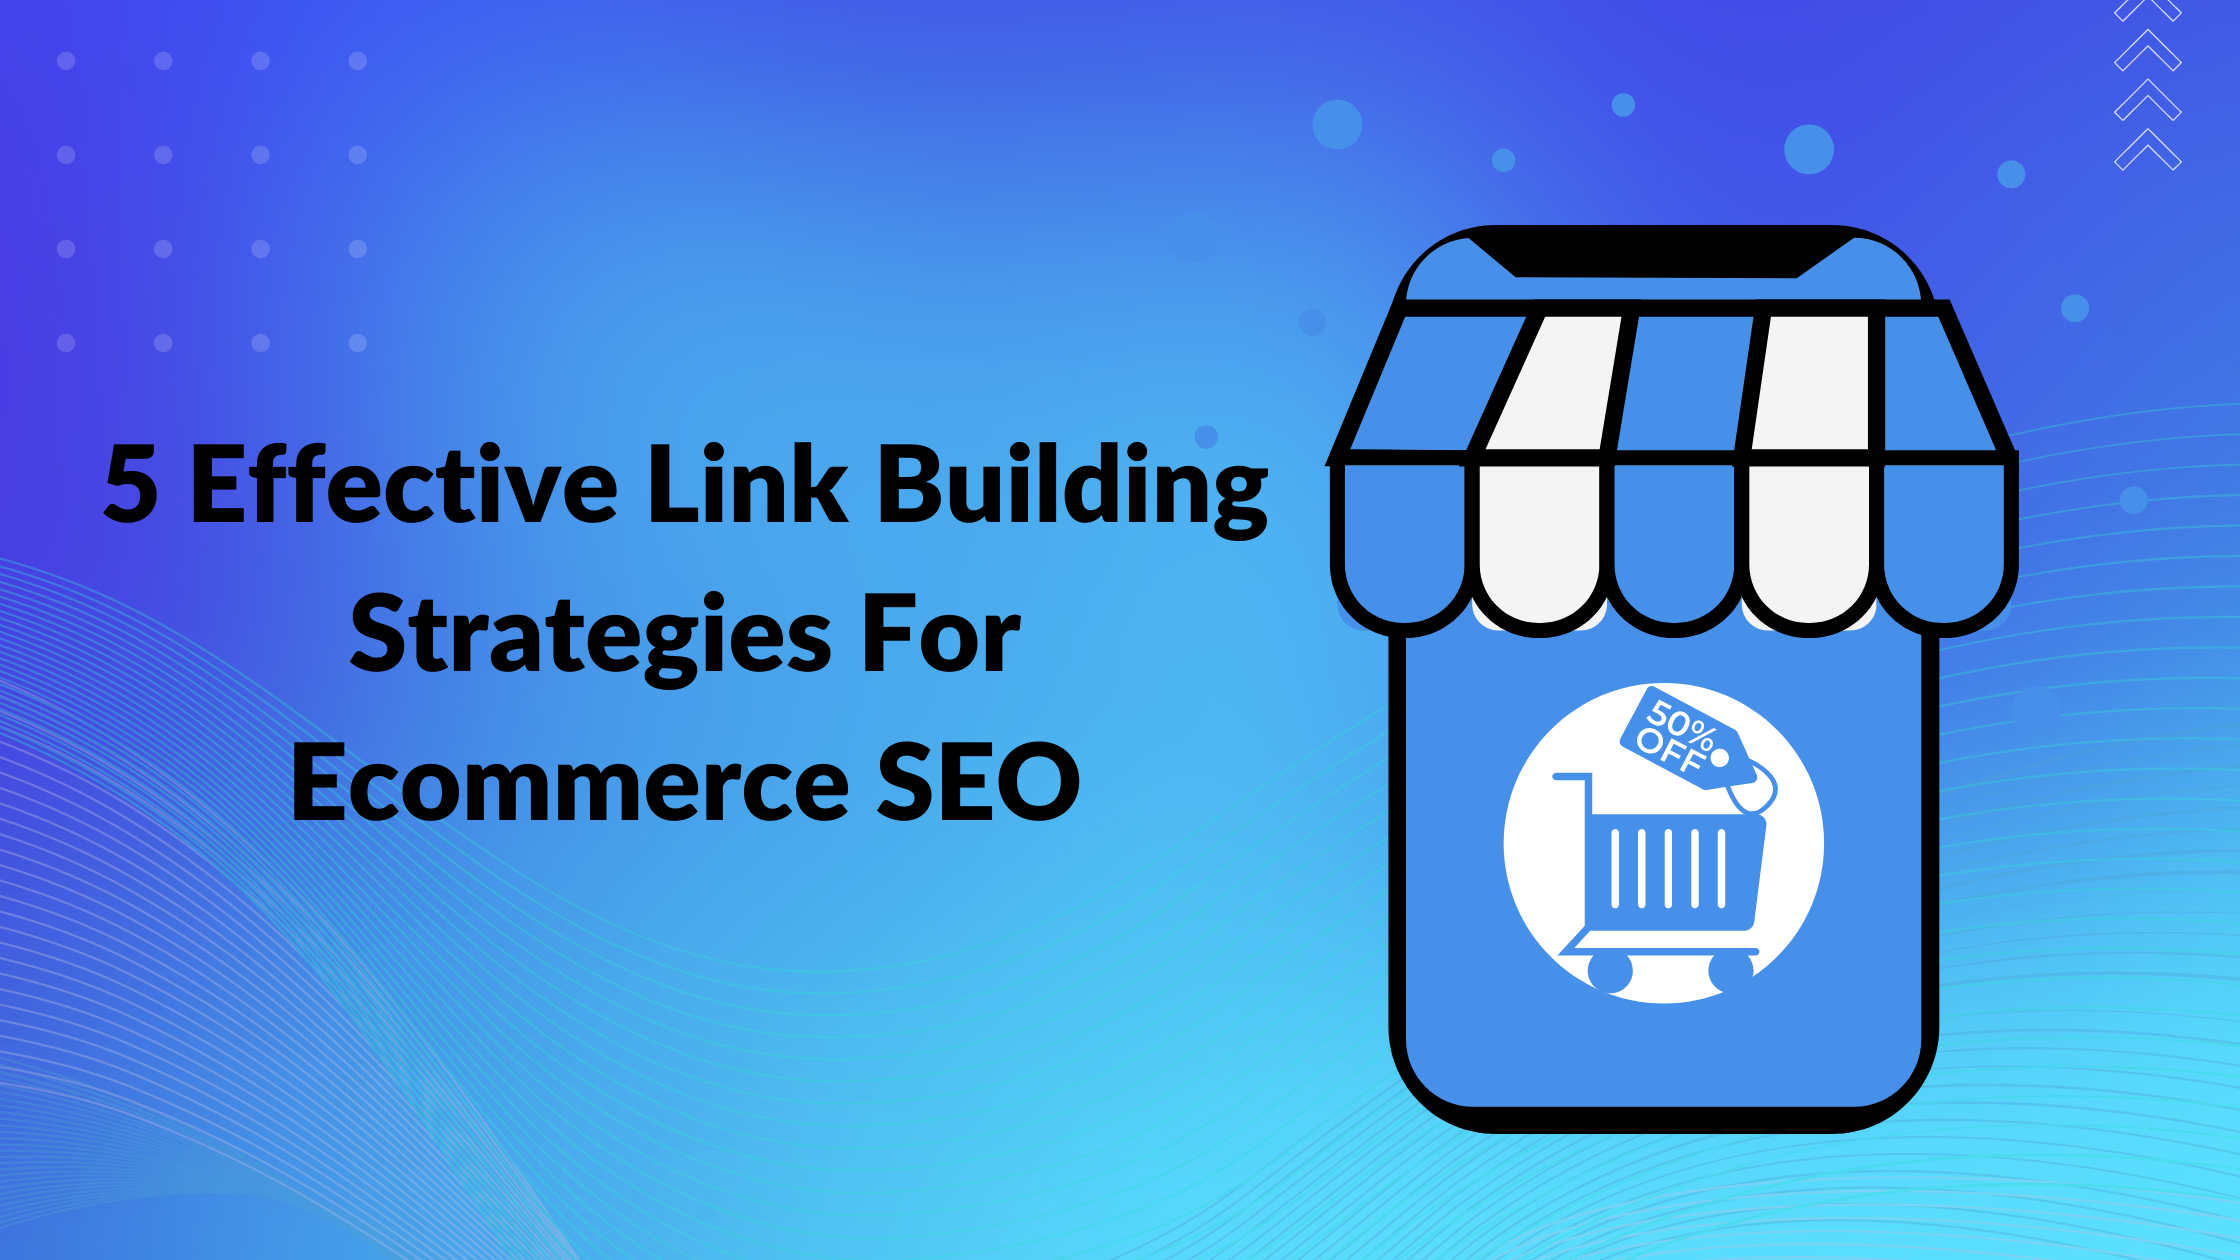 5 Effective Link Building Strategies For Ecommerce SEO